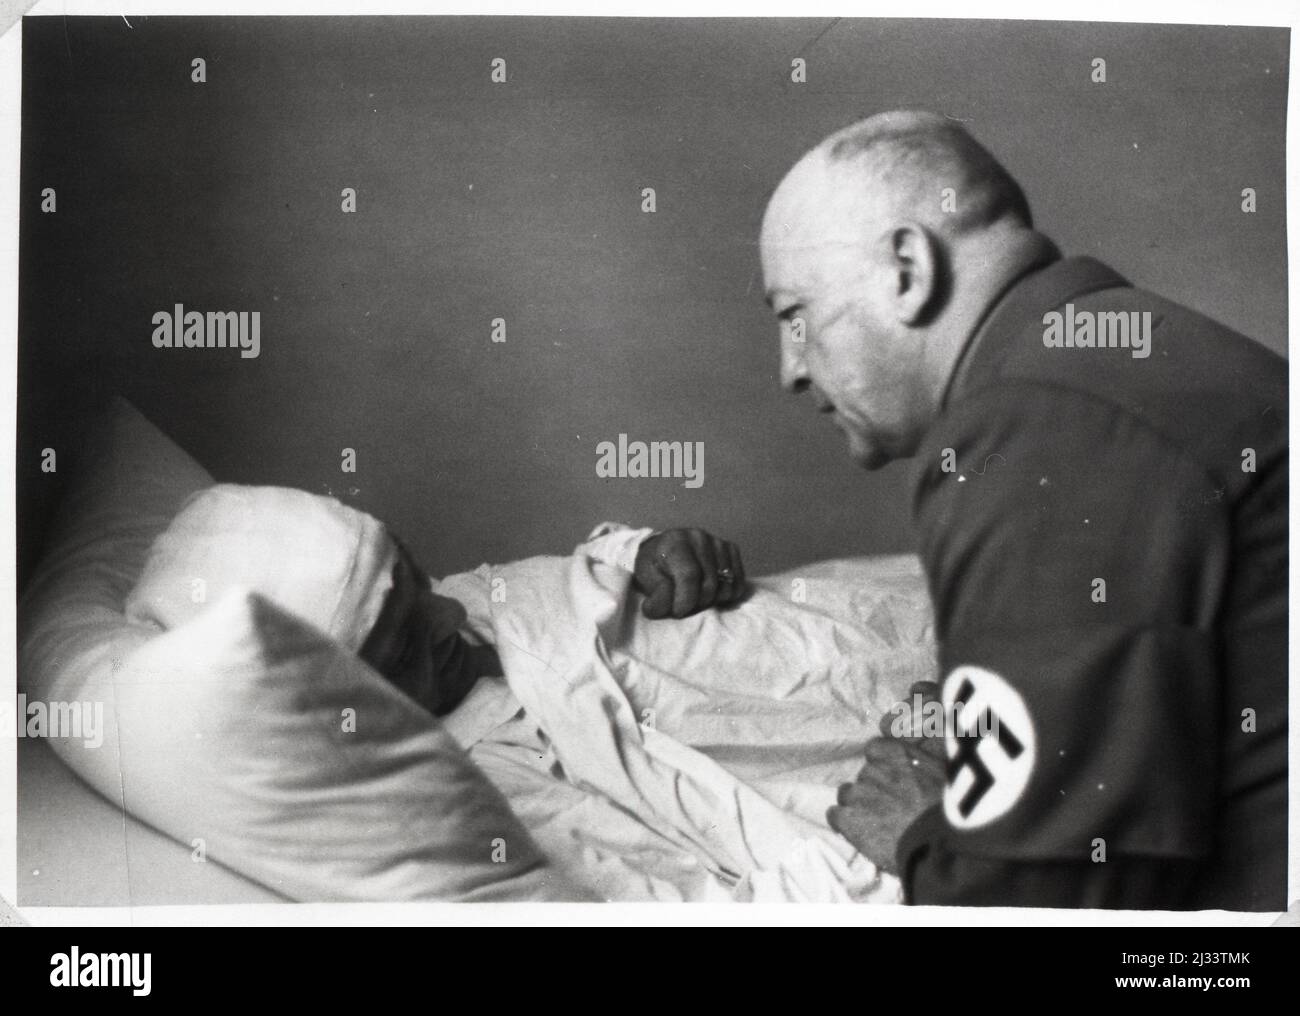 Gauleiter Wagner besucht die opfer des Attentats vom 9.11.1939 -  Official Wagner visits a victim of the assassination attempt on Nov. 9, 1939. Eva Braun's Photo Albums, ca. 1913 - ca. 1944. These albums are attributed to Eva Braun (four are claimed by her friend Herta Schneider, nee Ostermeyer) and document her life from ca. 1913 to 1944. There are many photographs of Eva, her sisters and their children, Herta Schneider and her children, as well as photographs of Eva's vacations, family members and friends. Included also are photographs taken by and of Eva Braun at Hitler's chalet Berghof (or Stock Photo